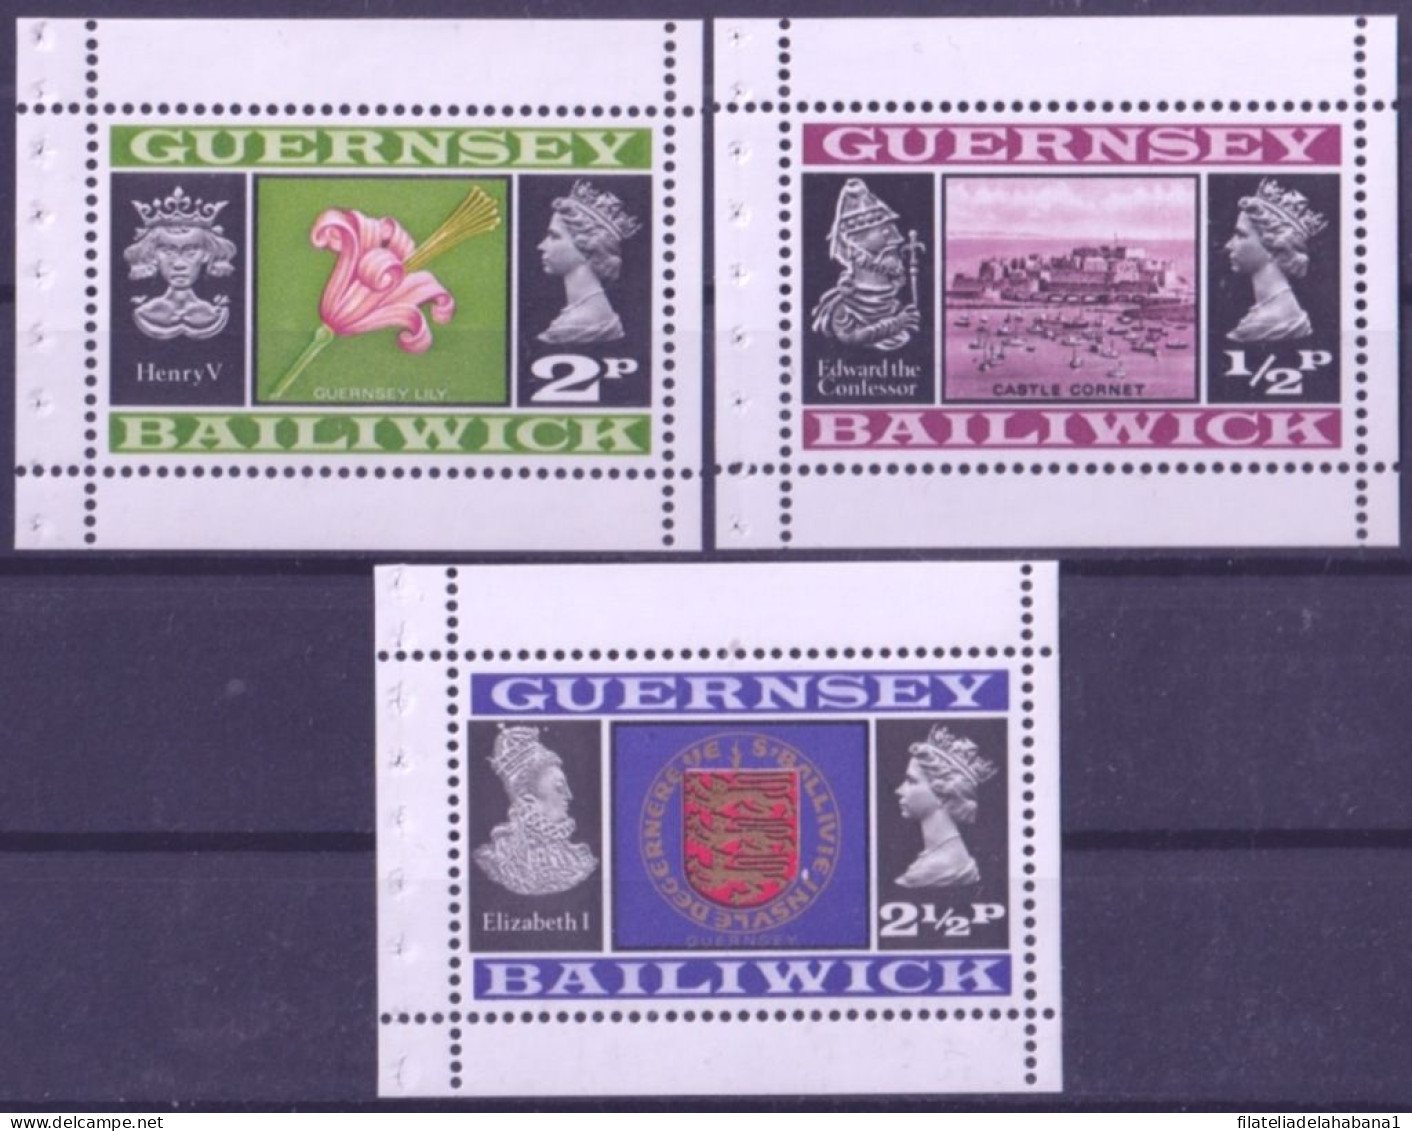 F-EX50274 GUERNSEY ENGLAND UK GB MNH 1971 BOOKLET LILY FLOWER MAP COAST ARMS.  - Guernsey